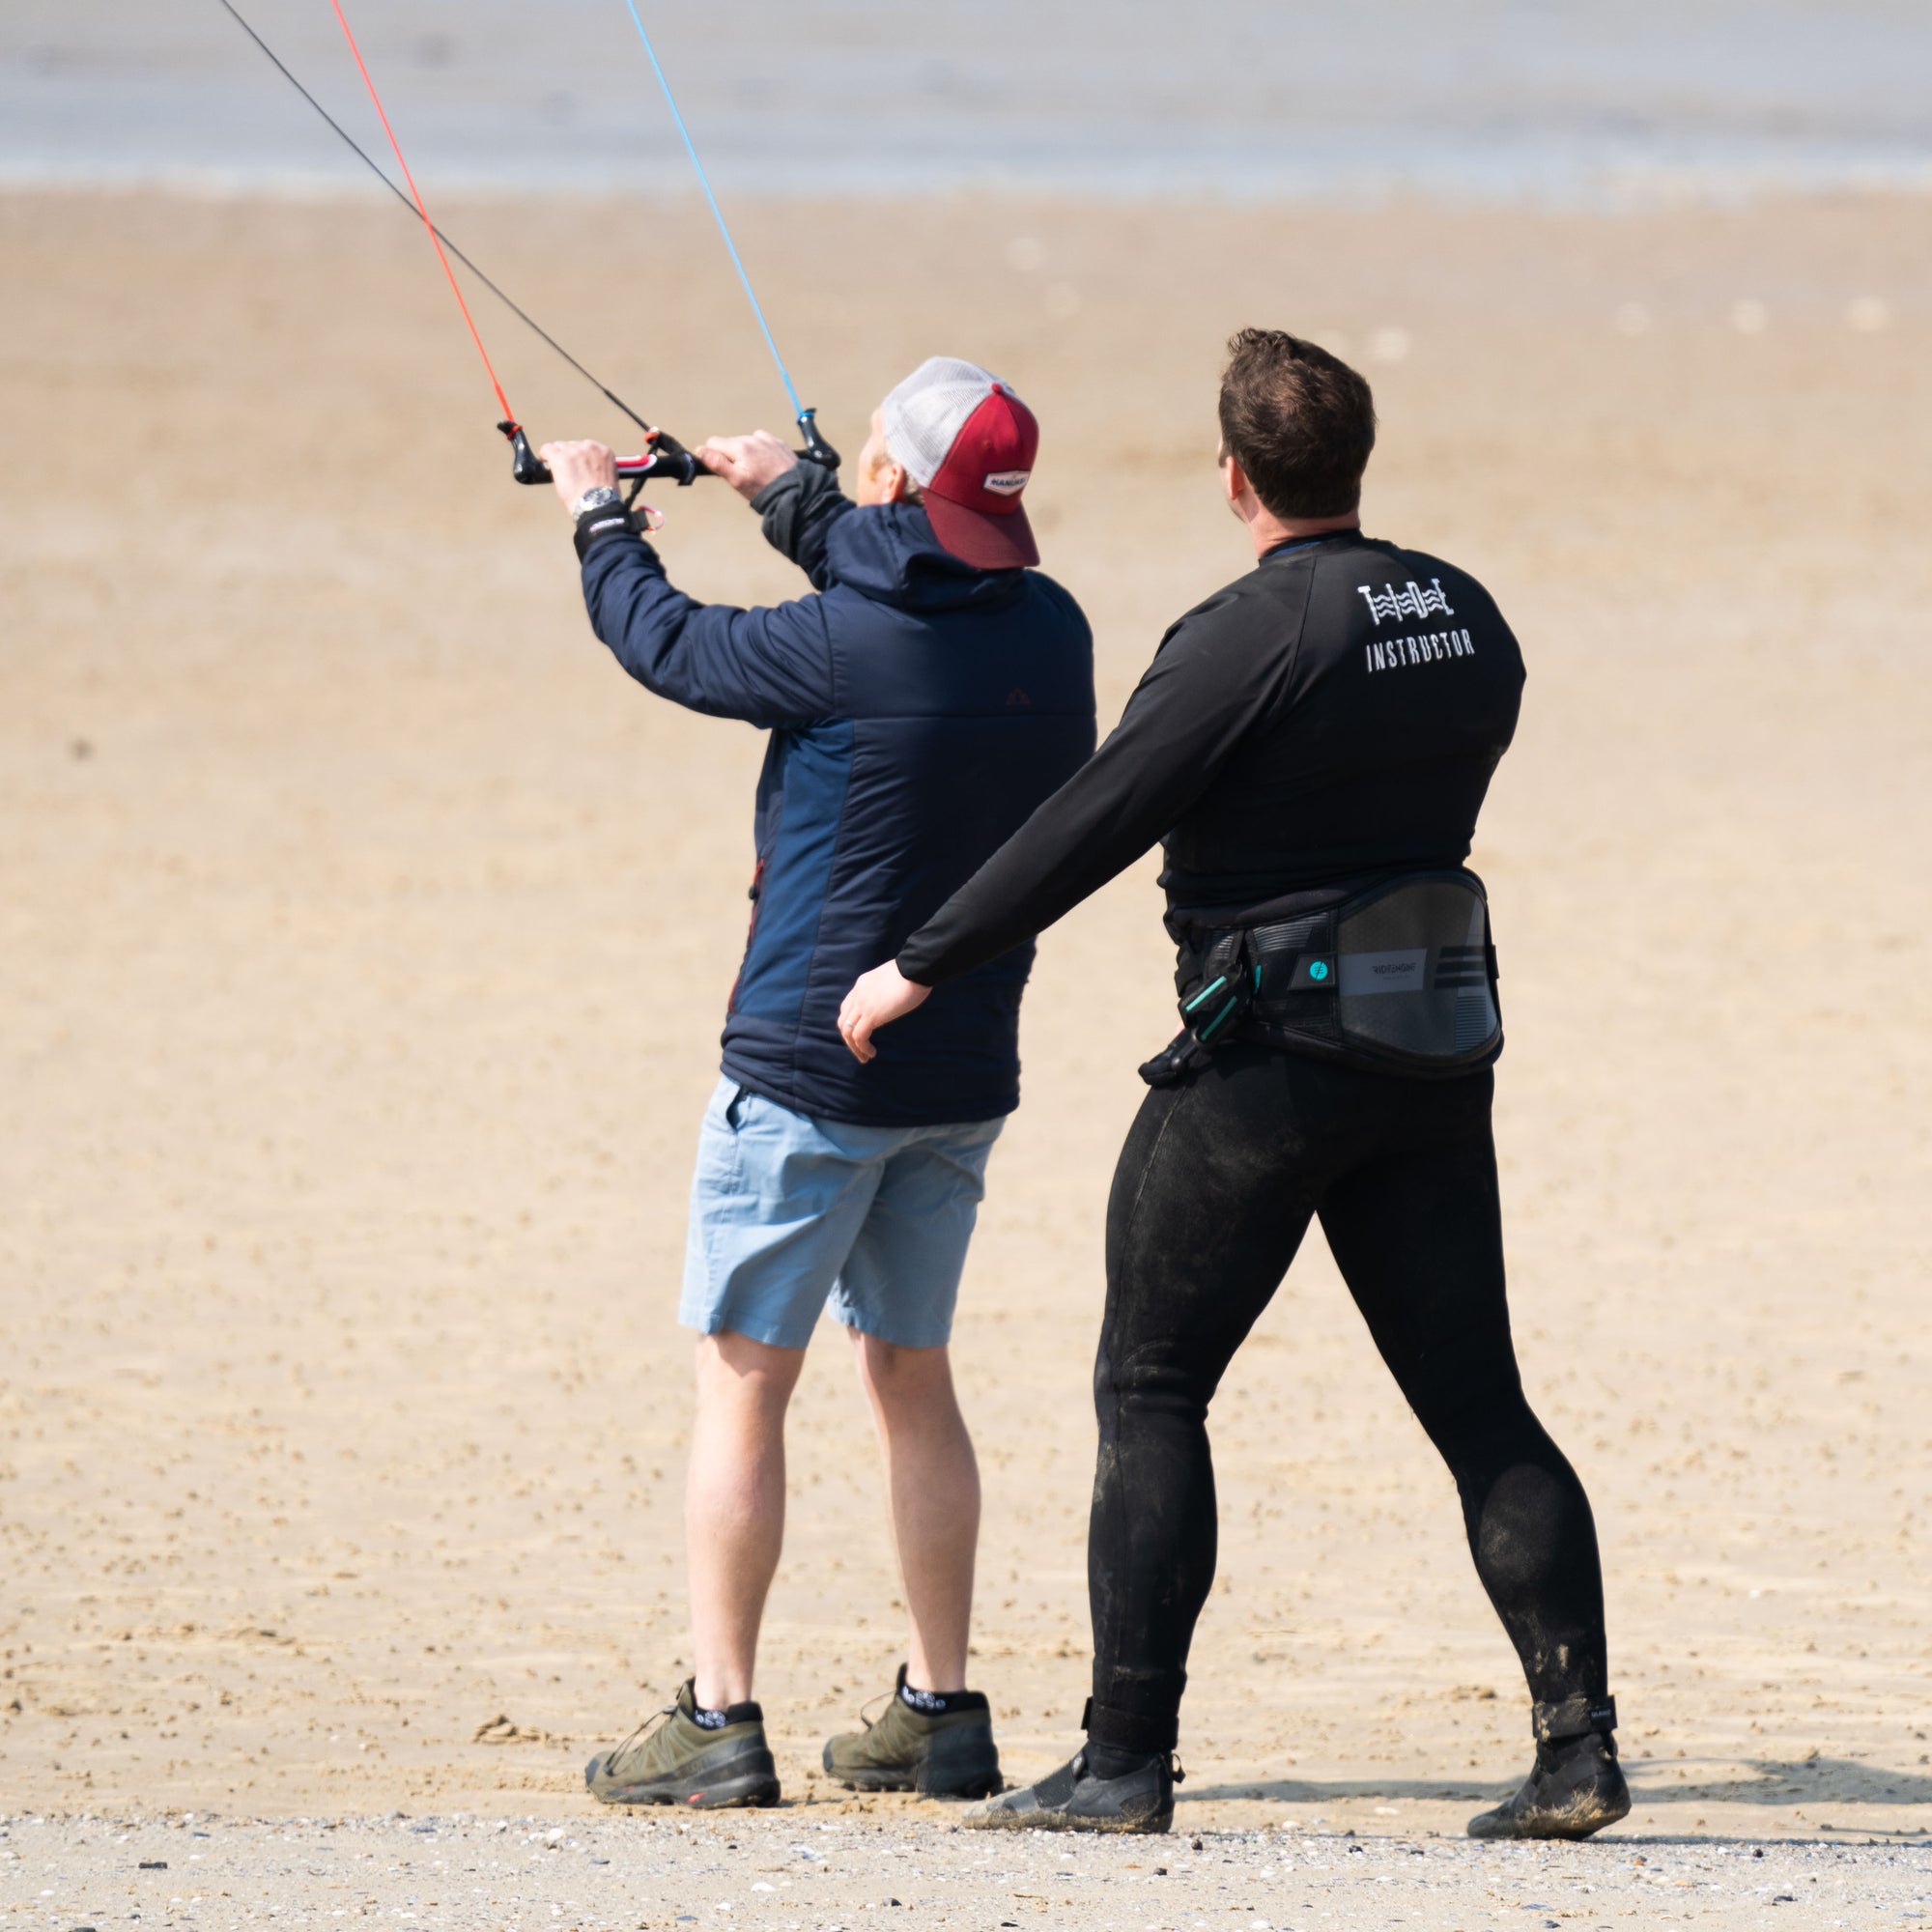 Instructor and one student on the kitesurfing initiation lesson.